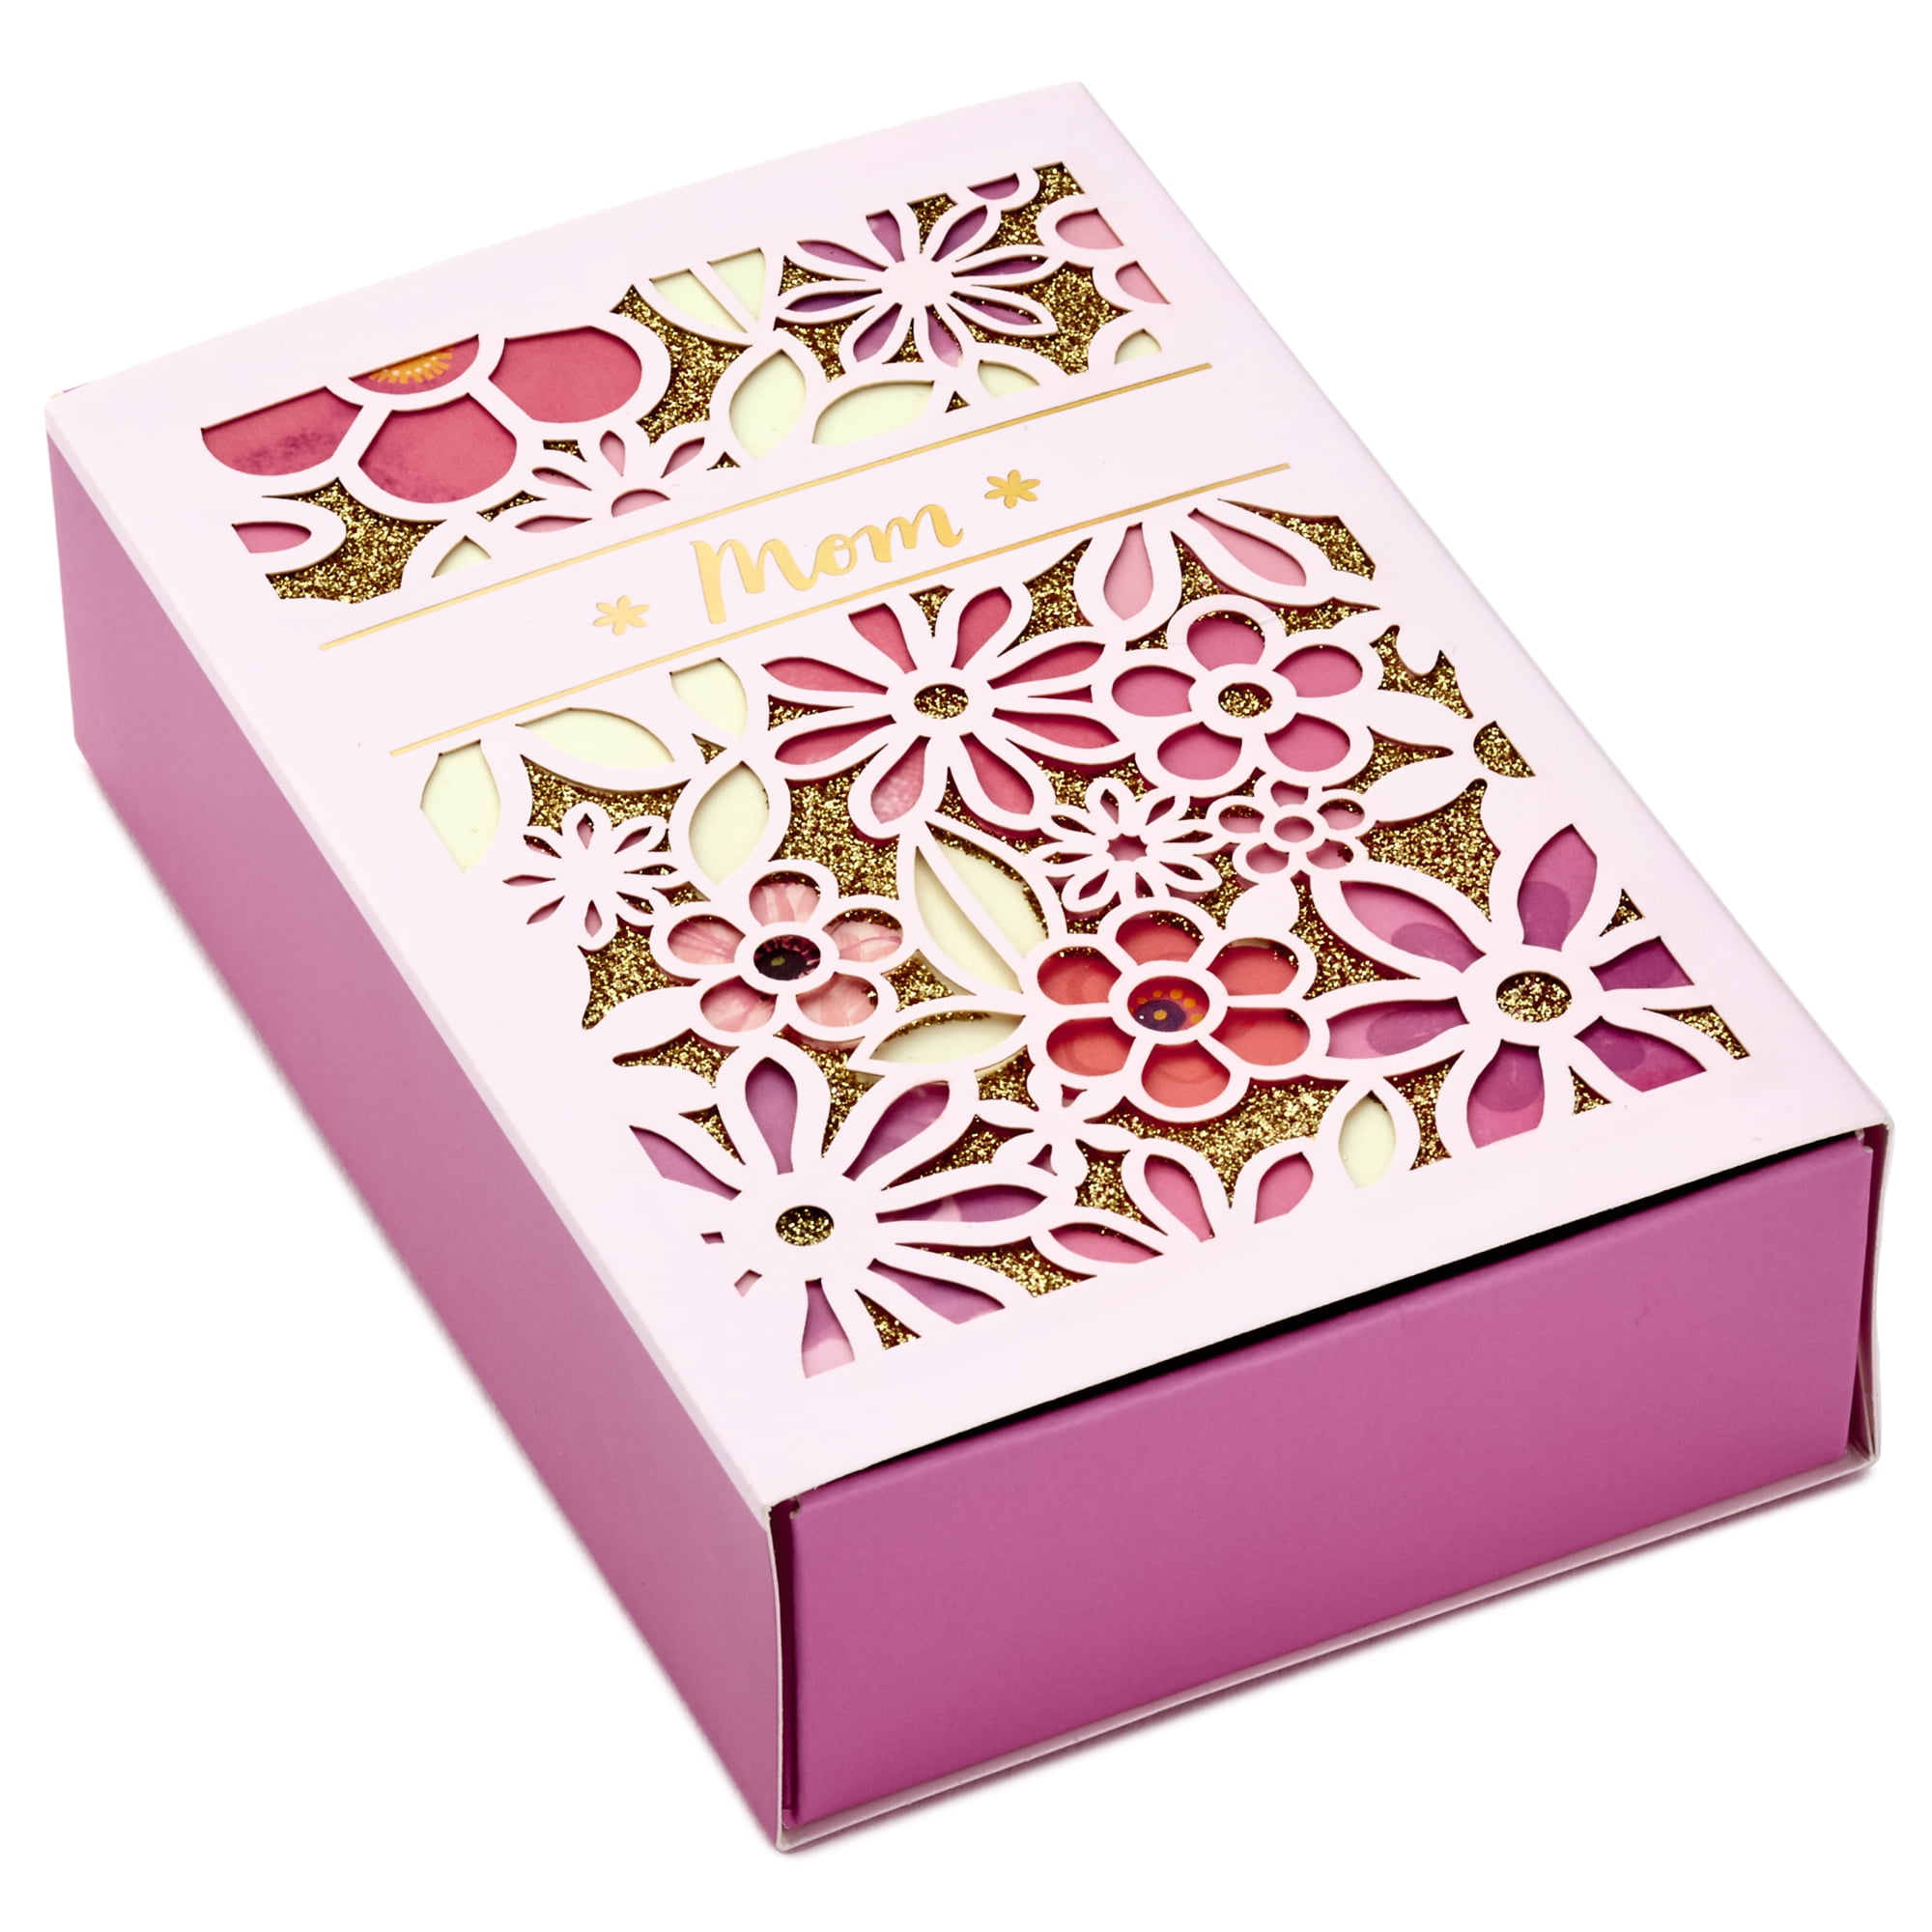 6 Item Mother's Day Box - Washington in a Box